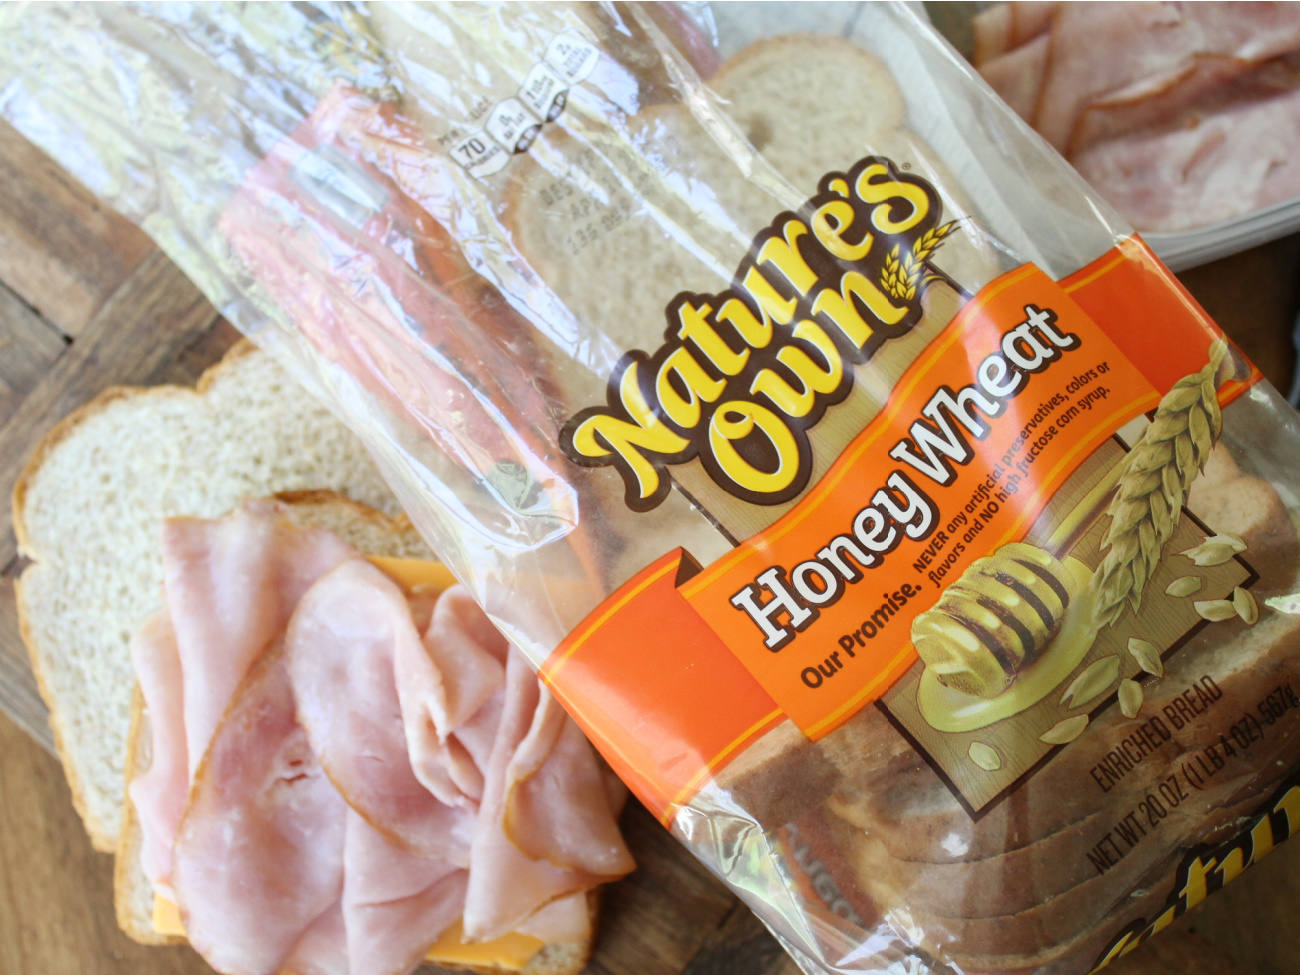 Nature’s Own Honey Wheat Bread Just $1.83 At Publix